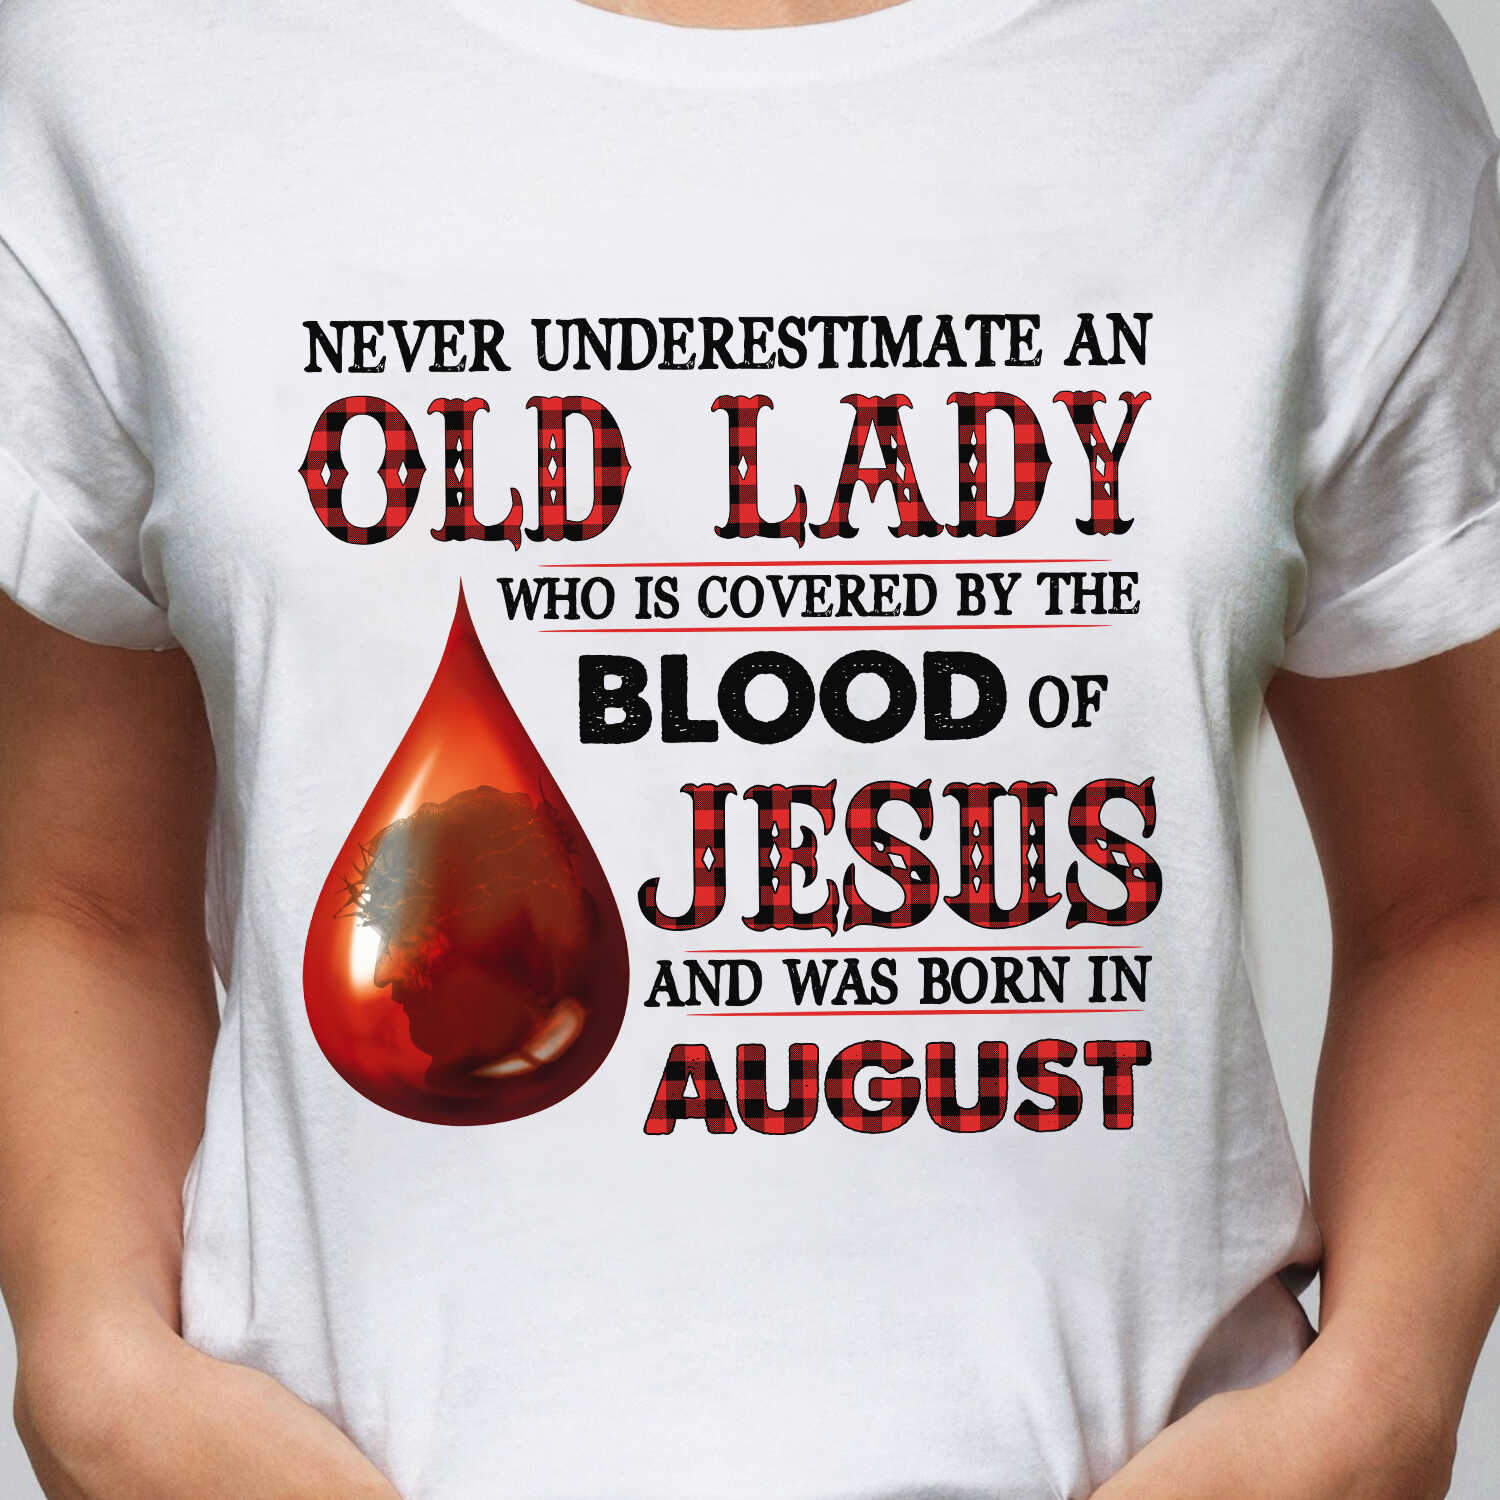 Never underestimate an old lady who is covered by the blood of Jesus and was born in August – Jesus T Shirt